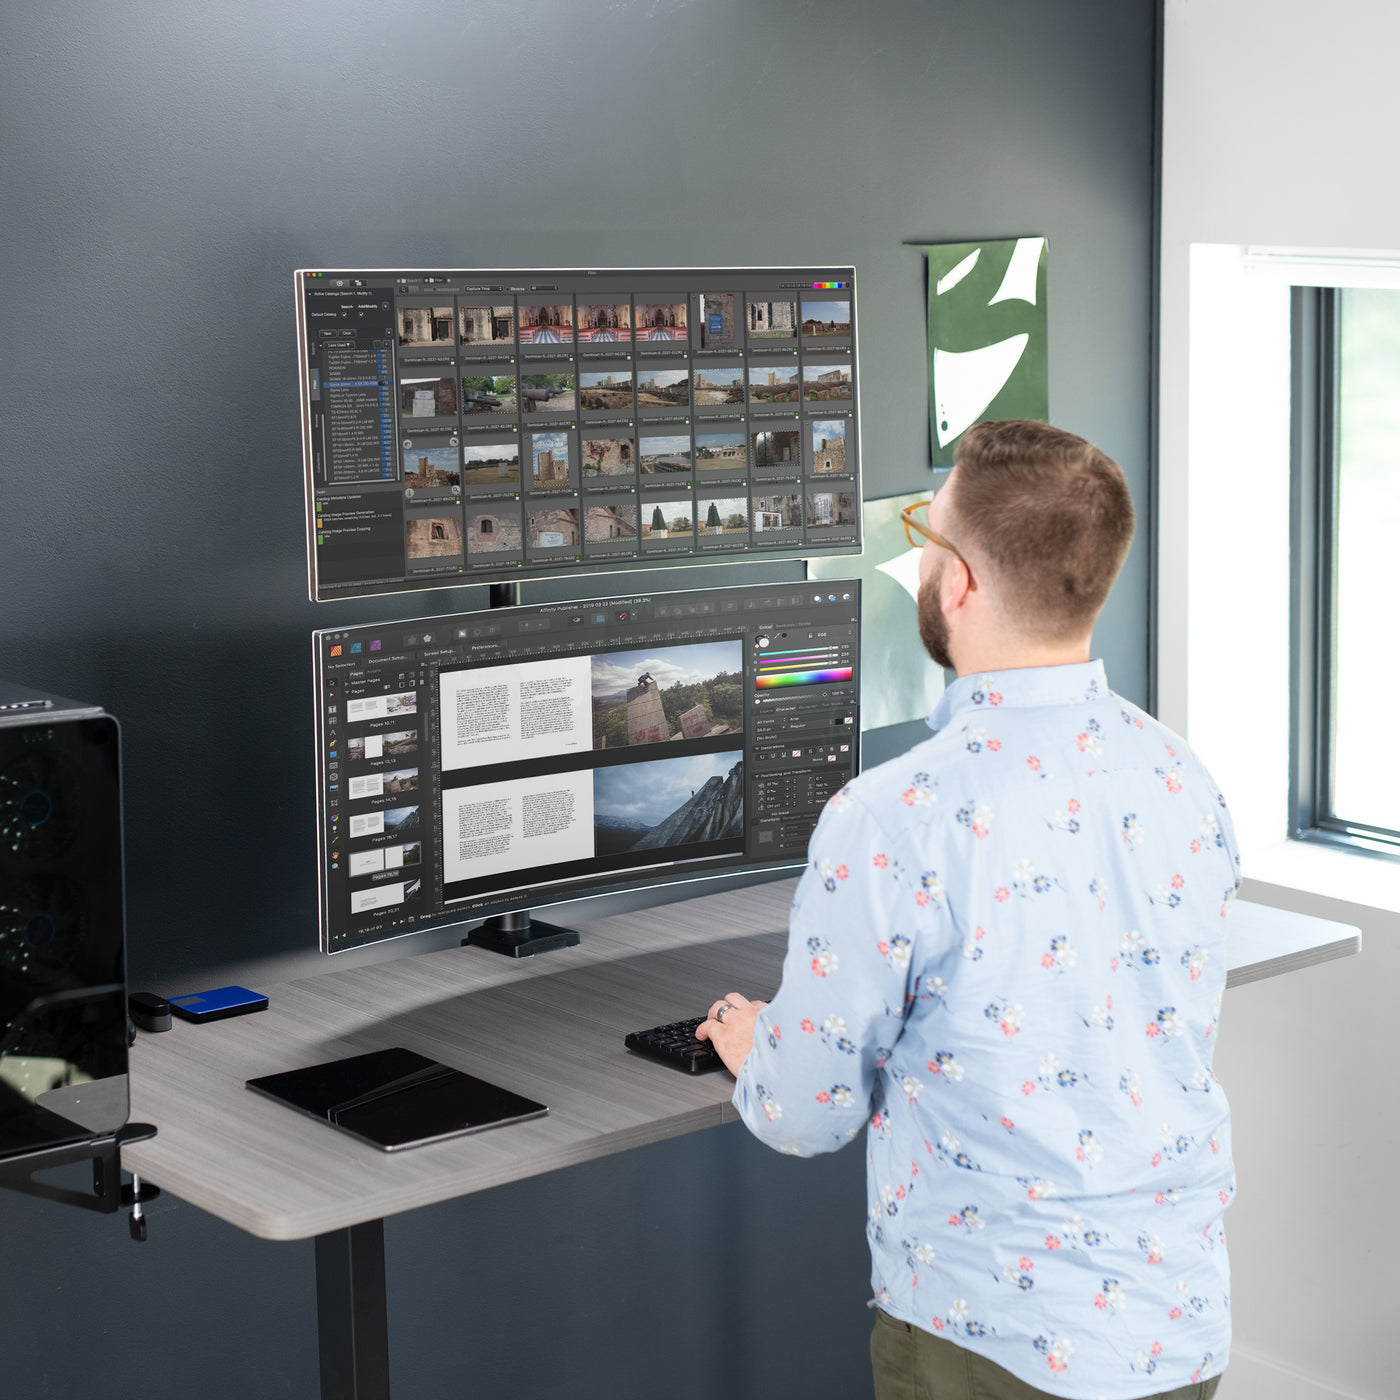 Dual Ultrawide Vertical Monitor Desk Mount in a stacked array elevates 2 large screens to a comfortable viewing angle and saves desk space.